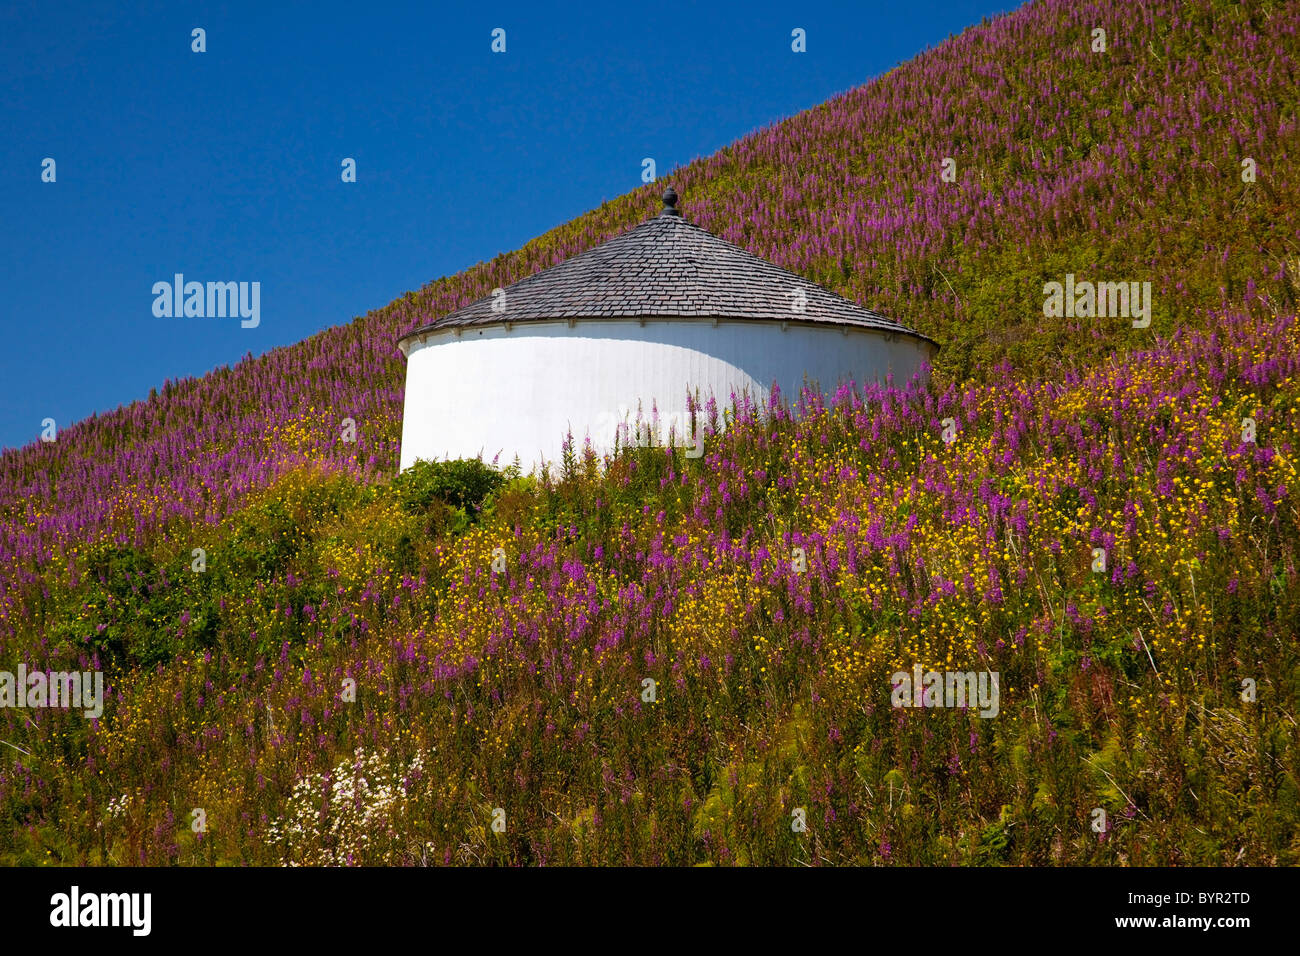 wildflowers and a white round building on a hillside along the oregon coast; oregon, united states of america Stock Photo